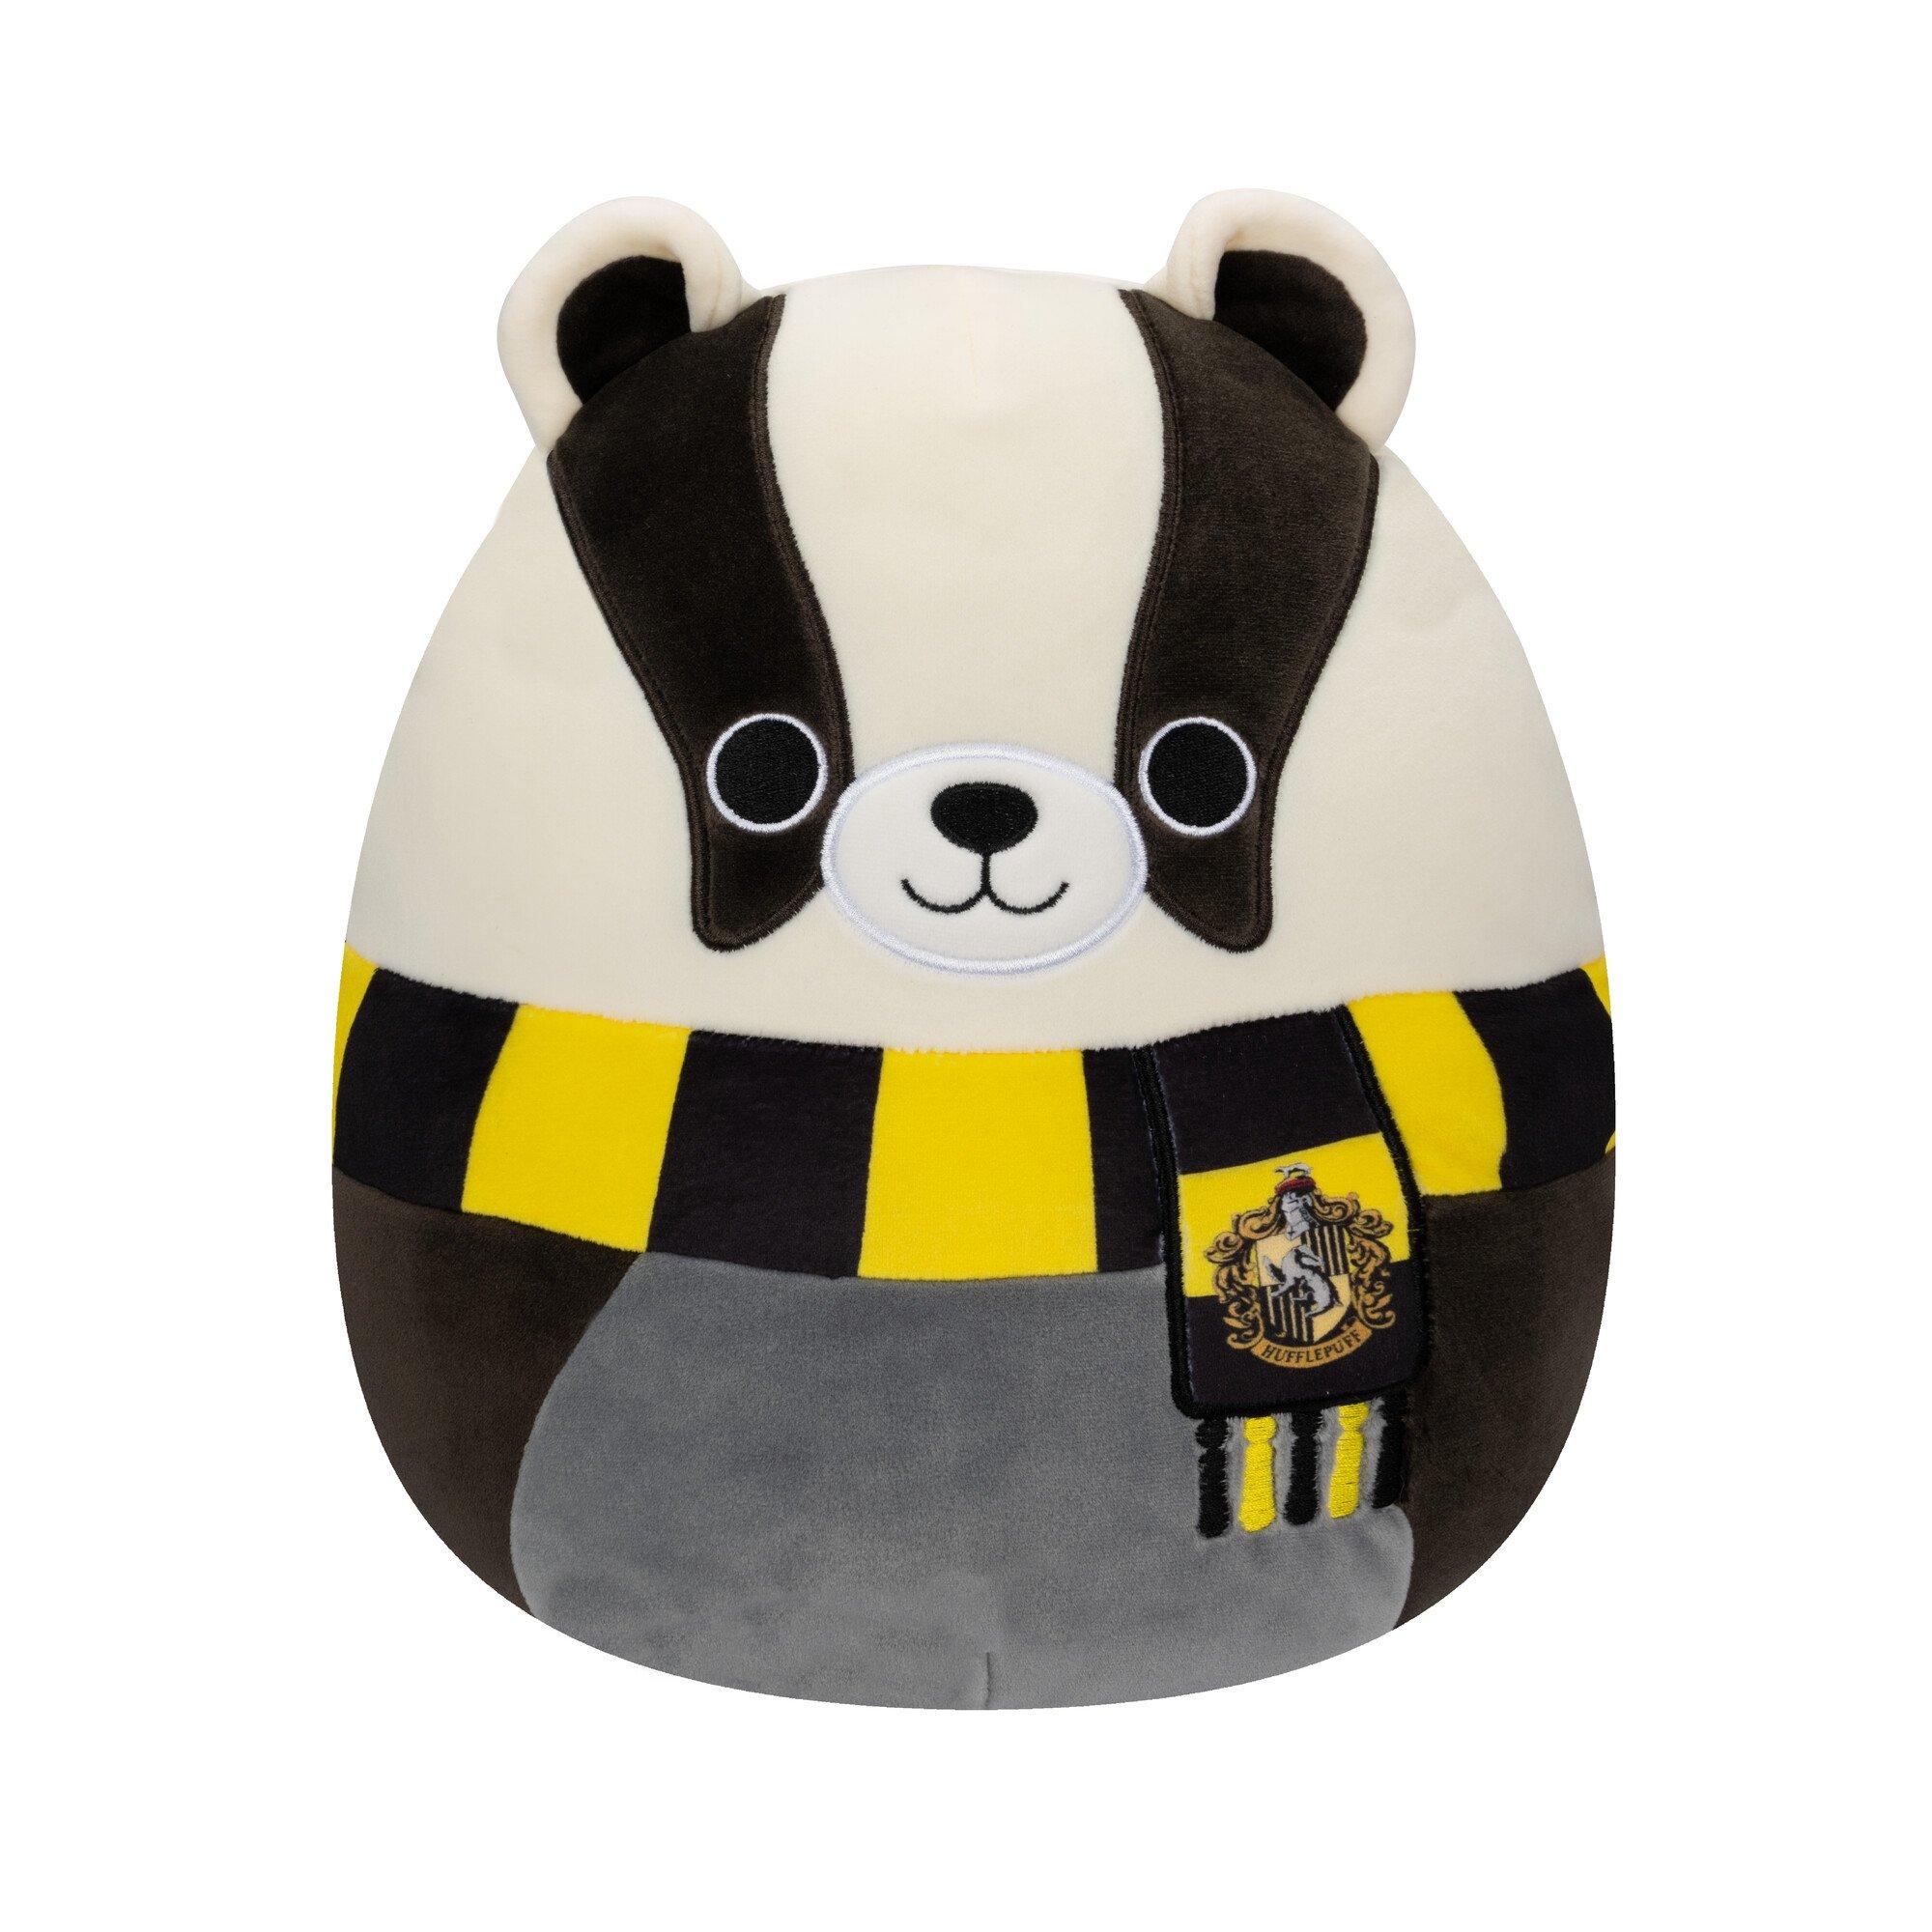 https://media.gamestop.com/i/gamestop/20004036/Squishmallows-Harry-Potter-House-Animals-8-in-Plush-Styles-May-Vary?$pdp$